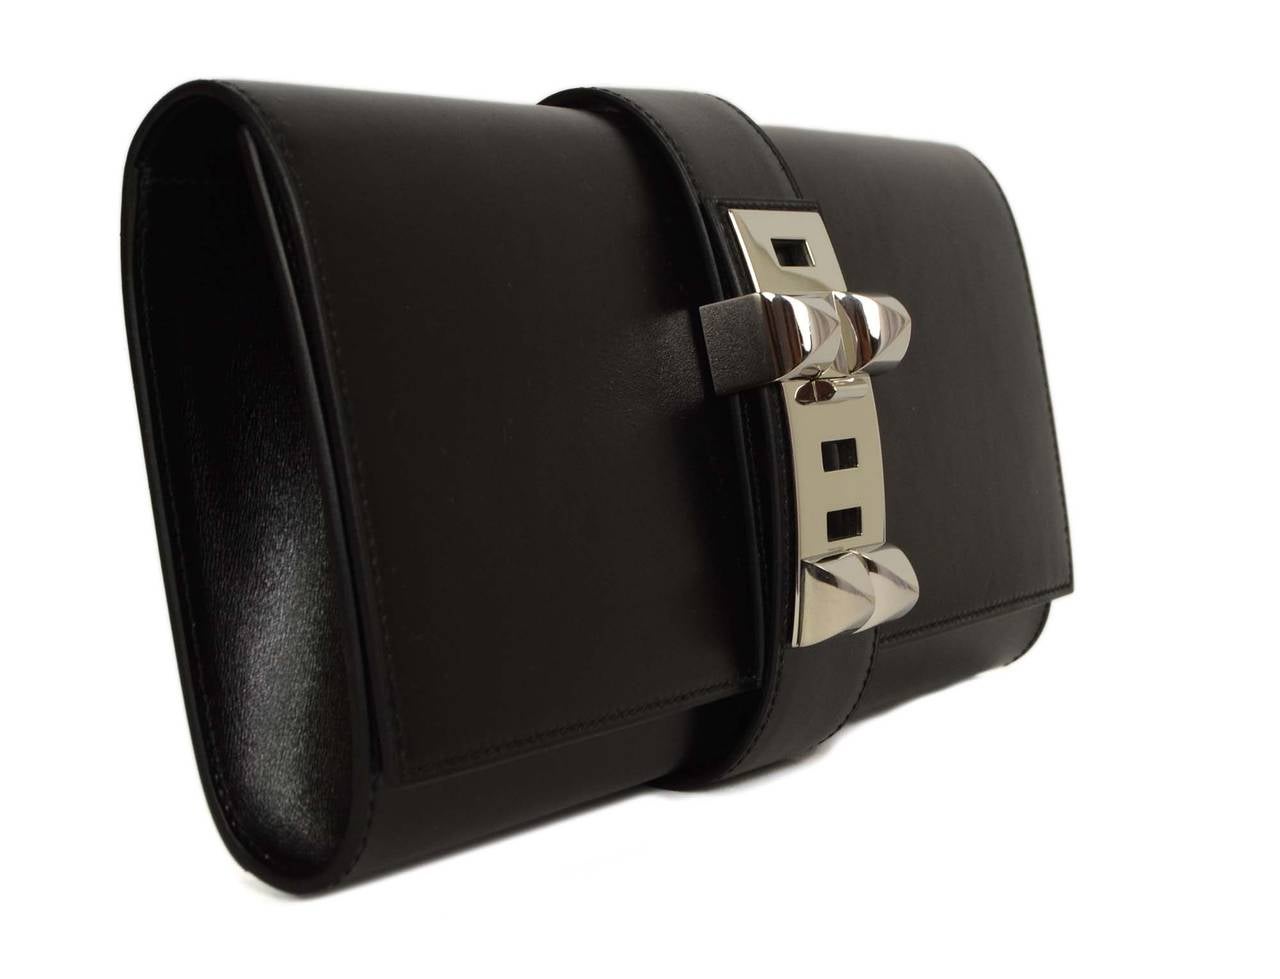 Hermes Black Box Leather 29cm Medor Clutch 
Made in: France
Year of Production: 2008
Color: Black and silvertone
Hardware: Palladium
Materials: Box leather and metal
Lining: Black chevre leather
Closure/opening: Flap top with palladium